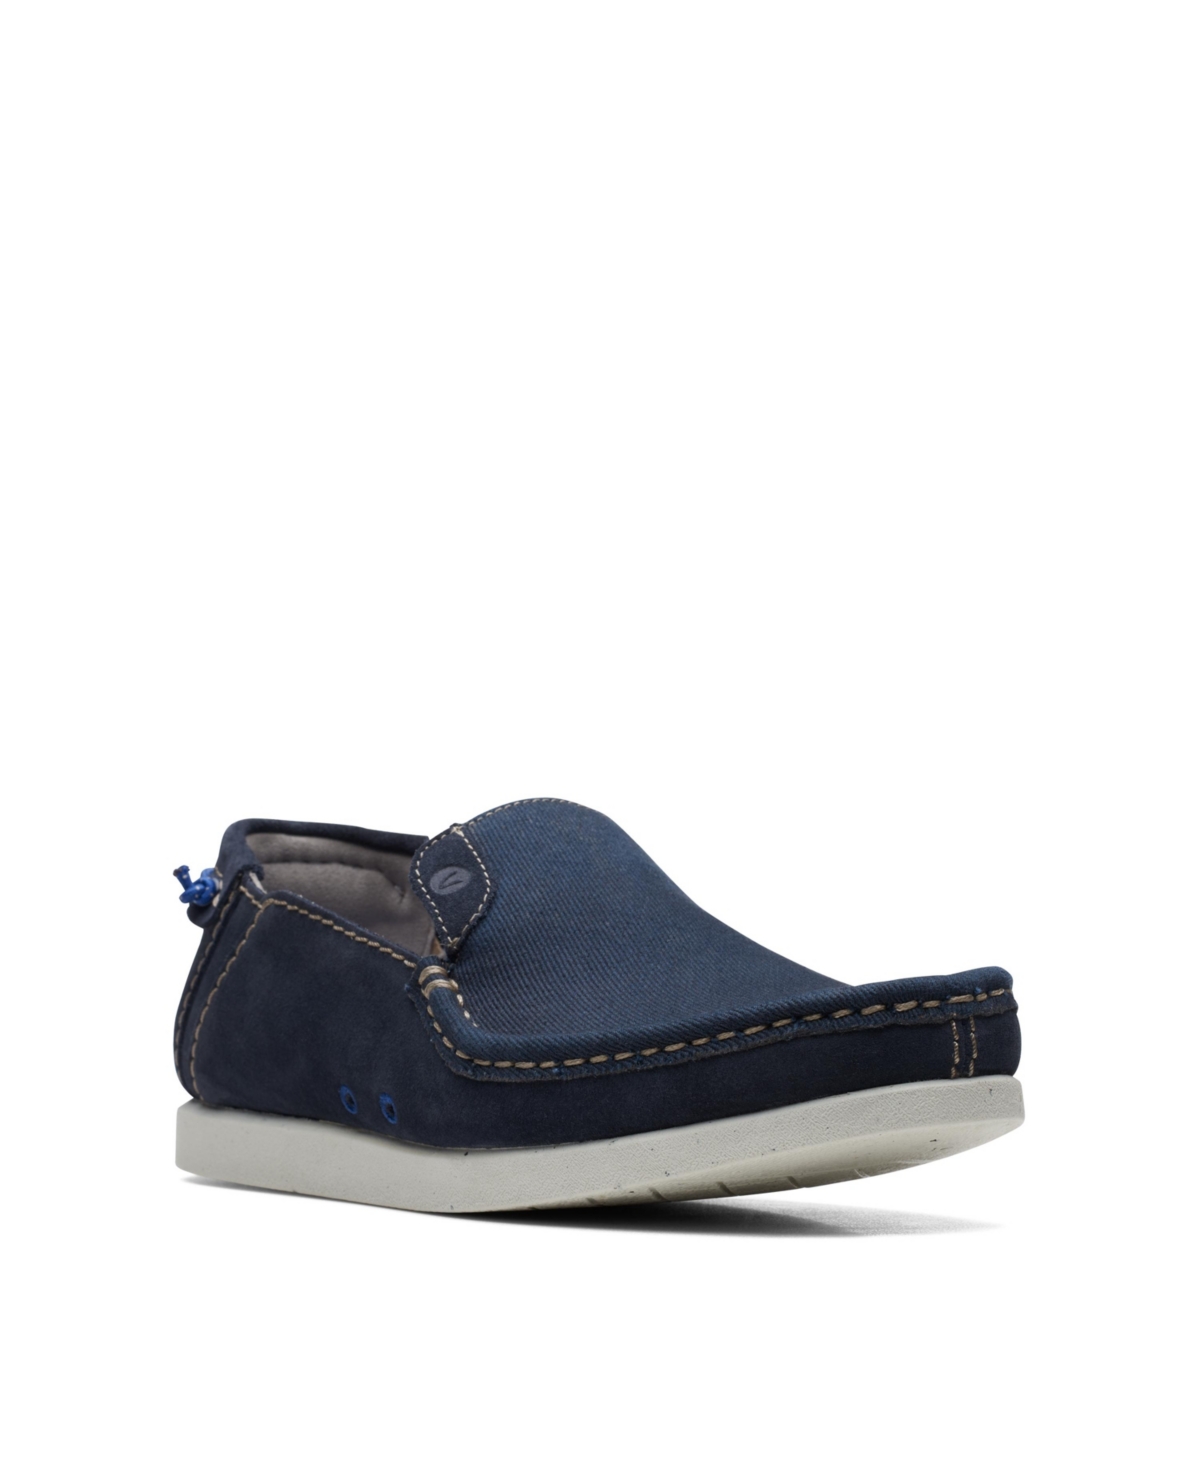 Clarks Men's Collection Shacrelite Step Slip-on Shoes In Navy Combi